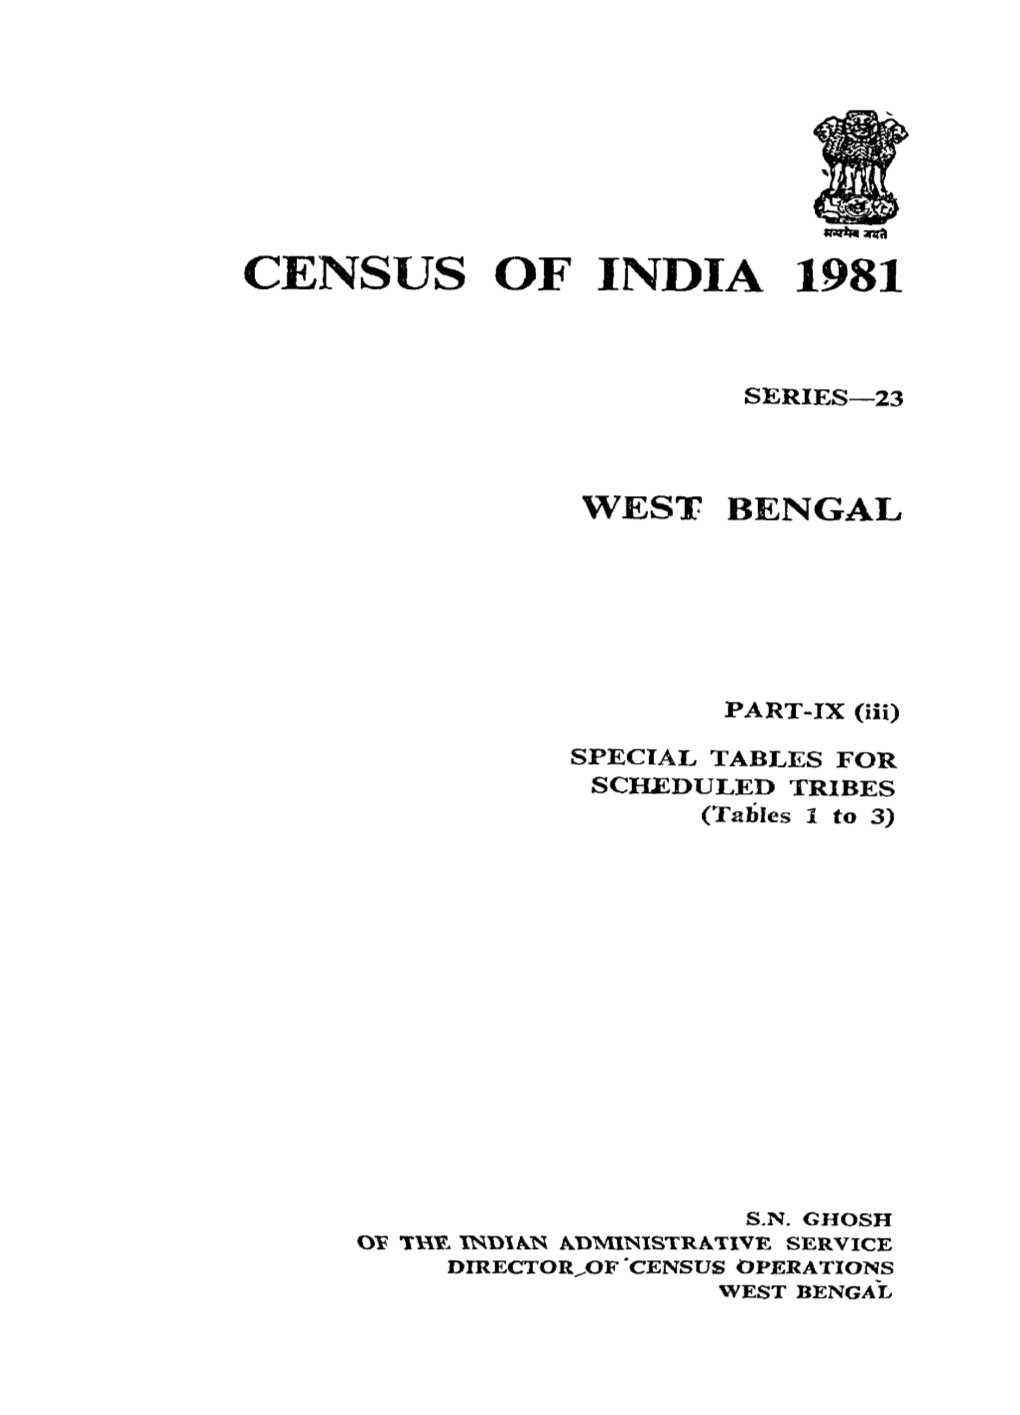 Special Tables for Scheduled Tribes, Part IX- (Iii), Series-23, West Bengal